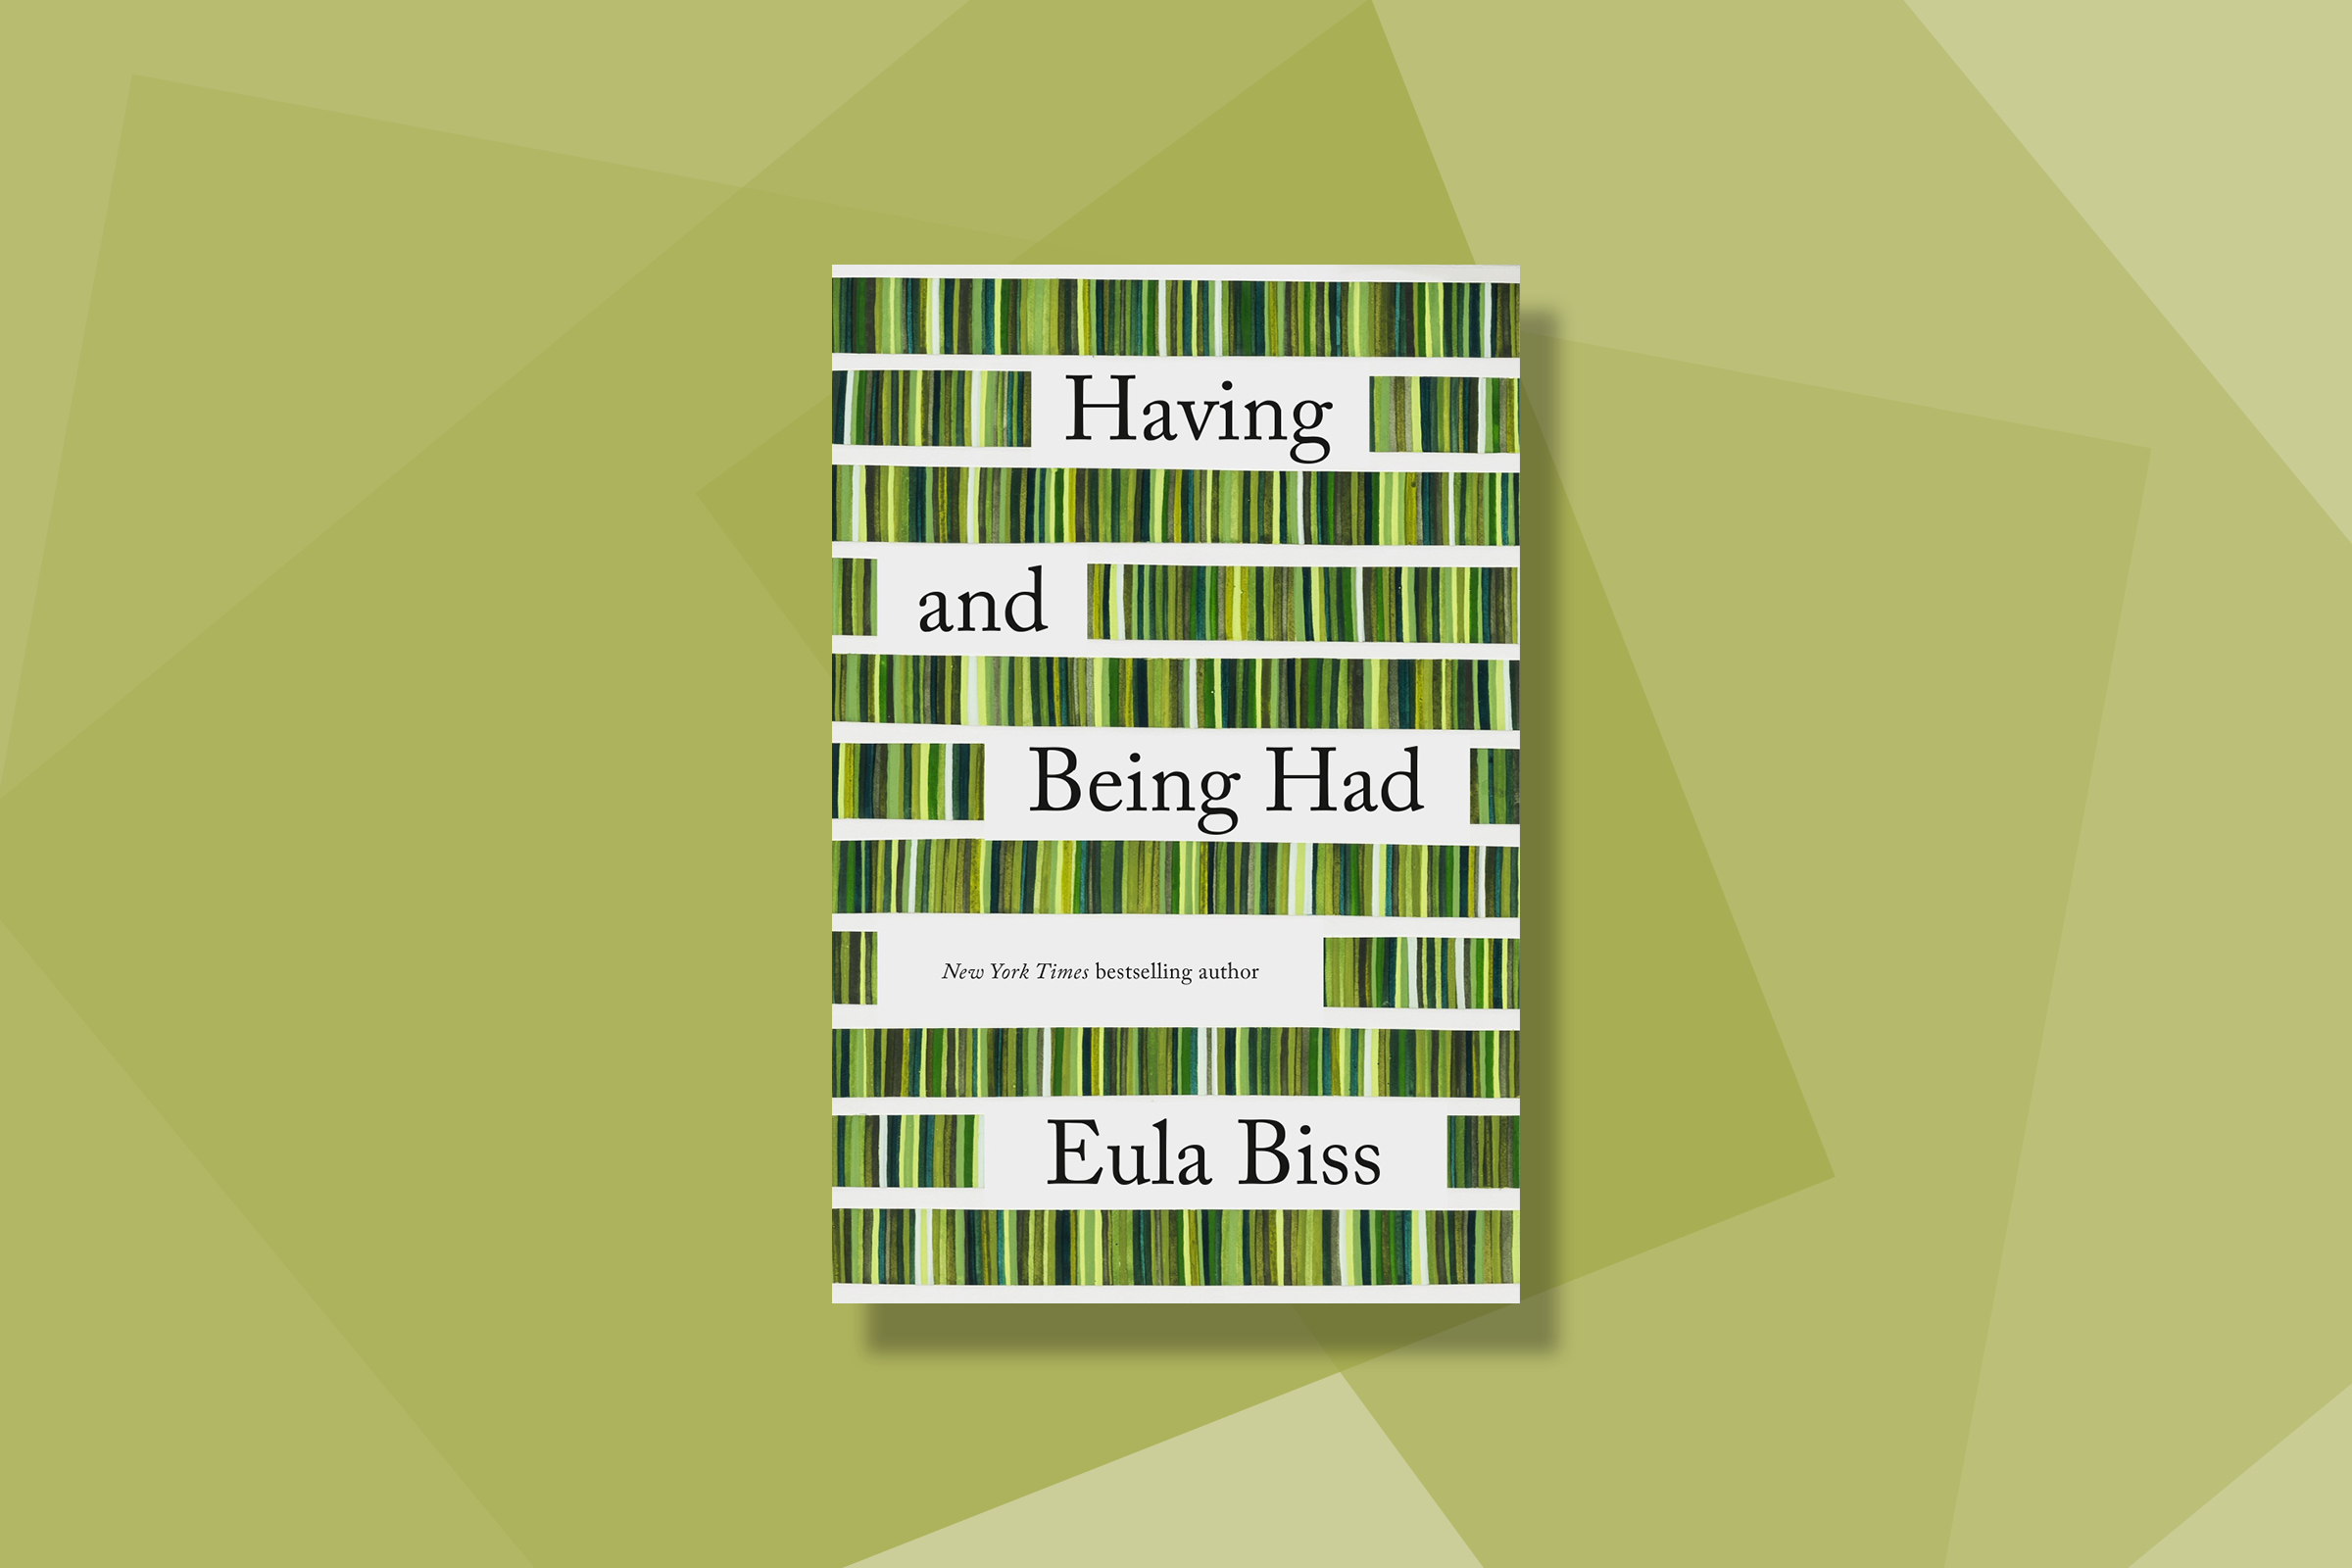 best-books-2020-Having and Being Had